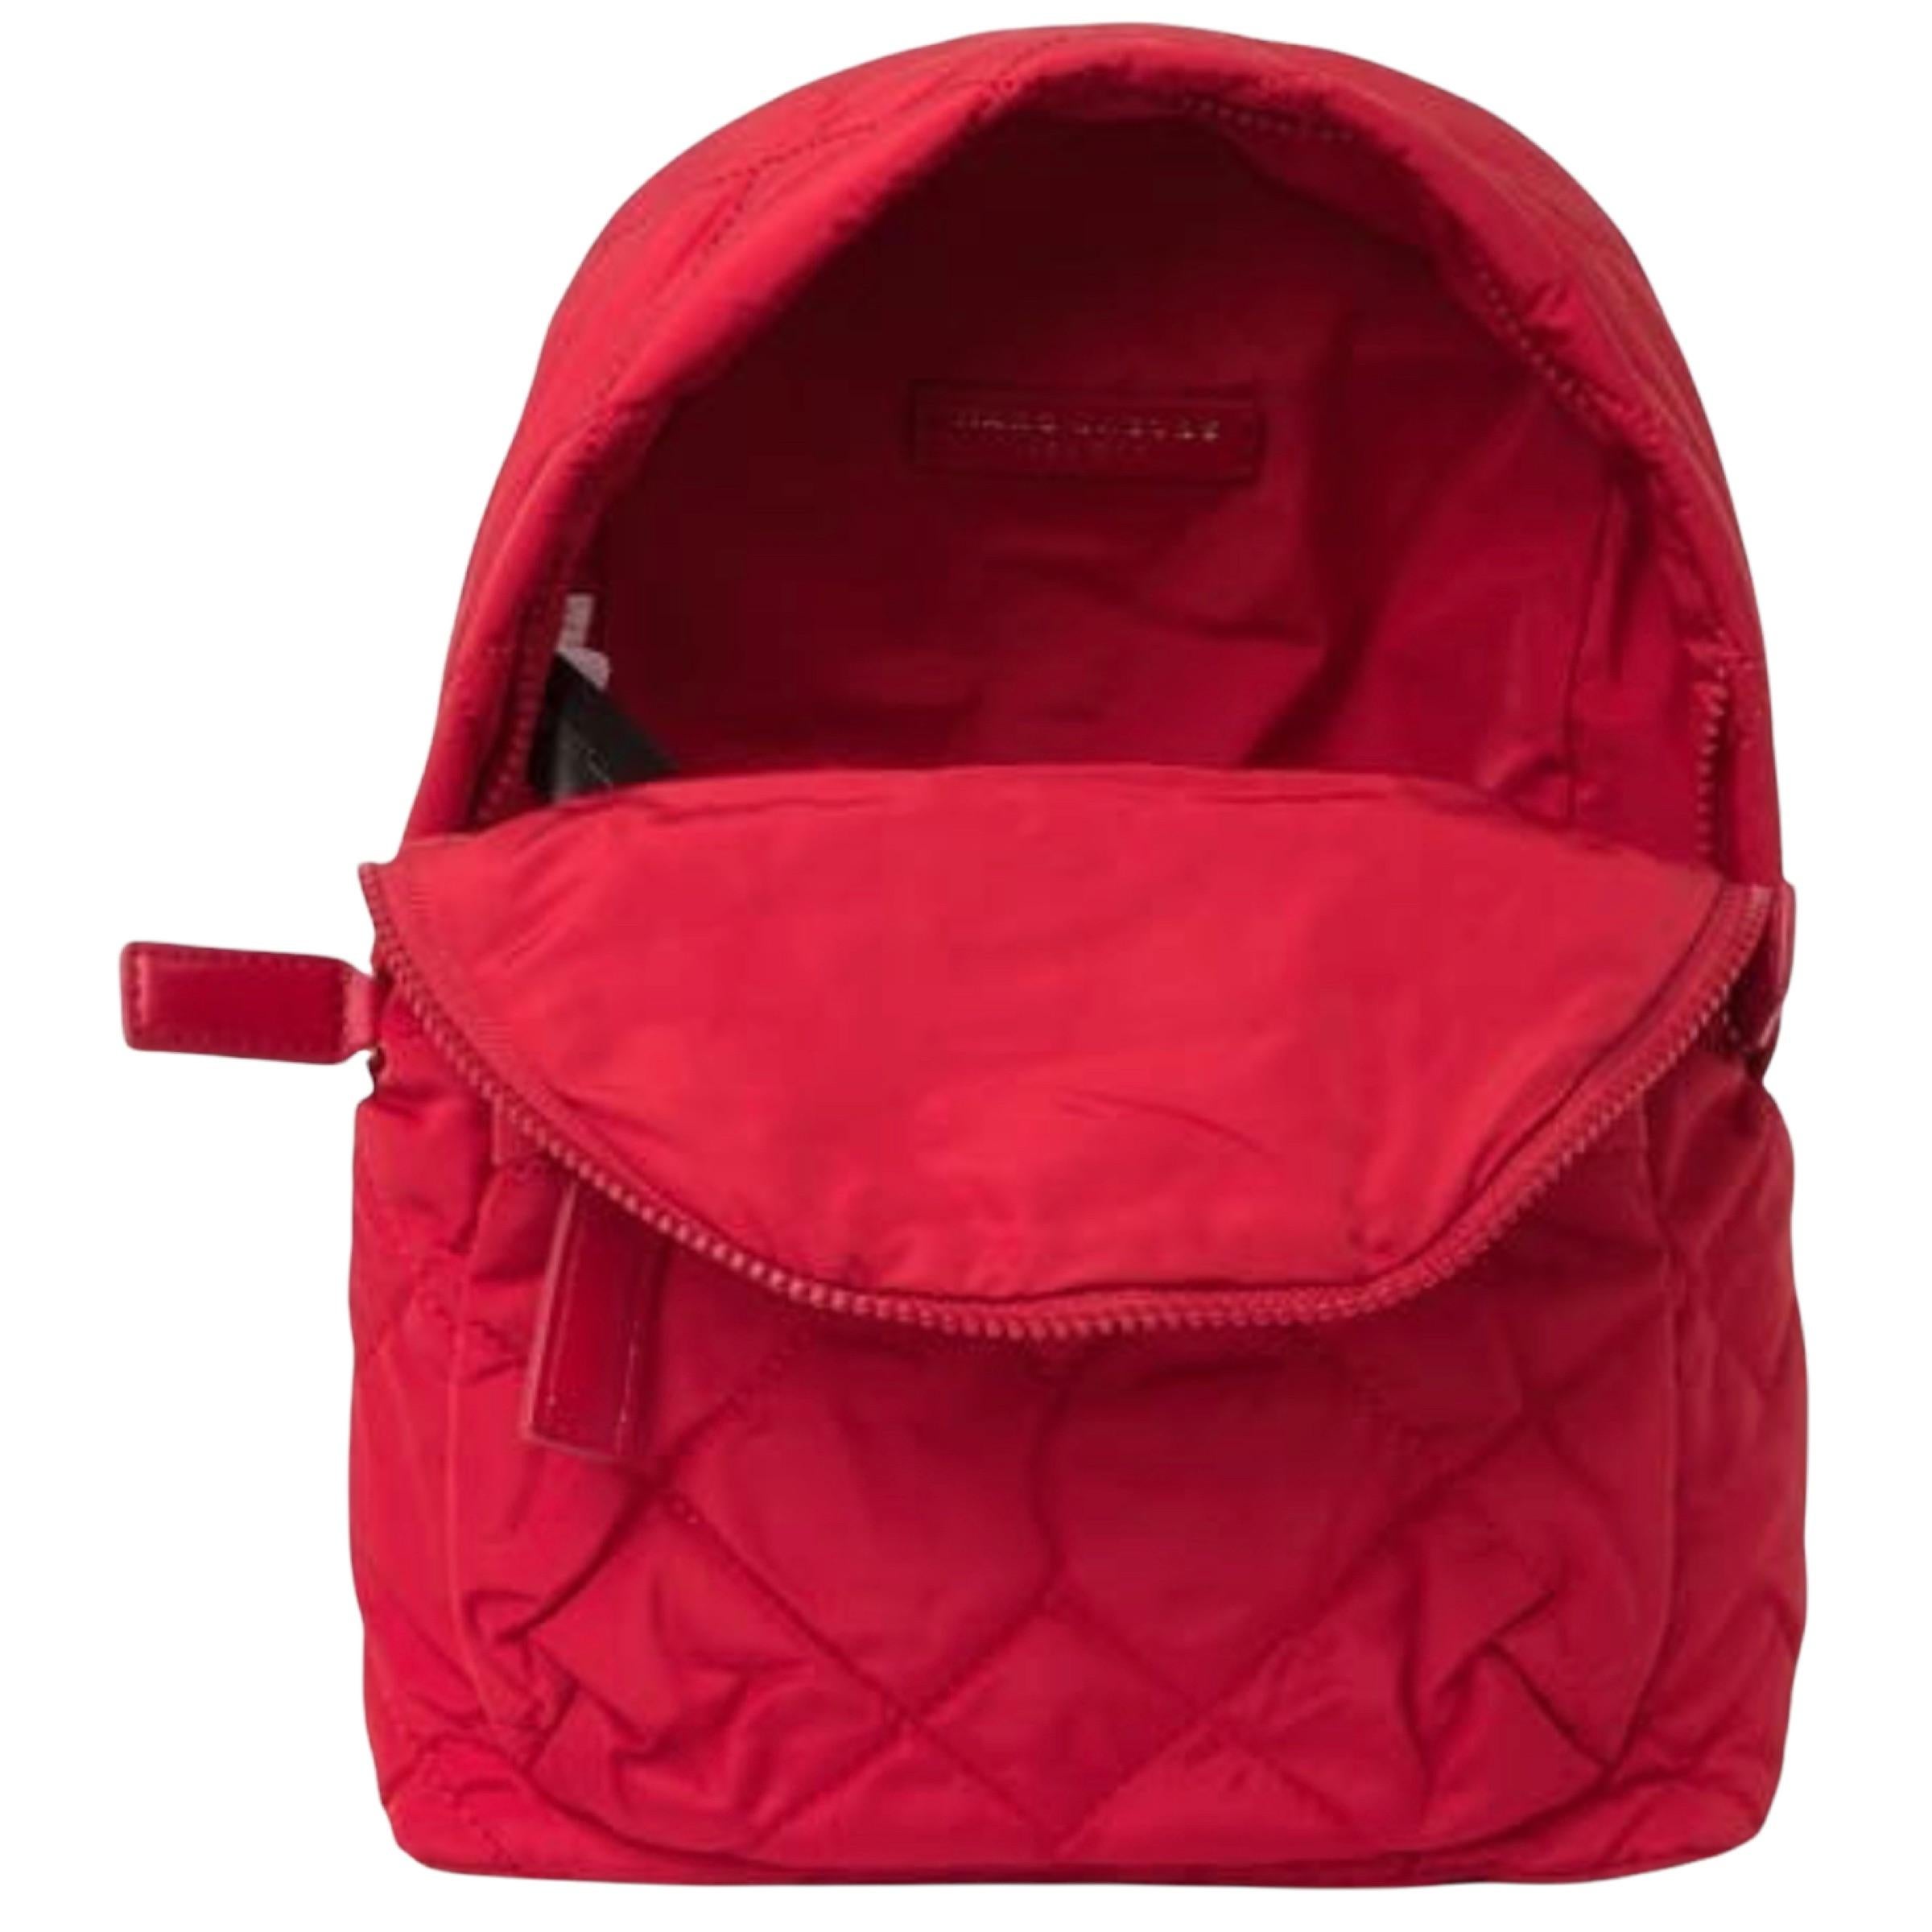 Women's or Men's NEW Marc Jacobs Red Quilted Nylon Mini Backpack Rucksack Bag